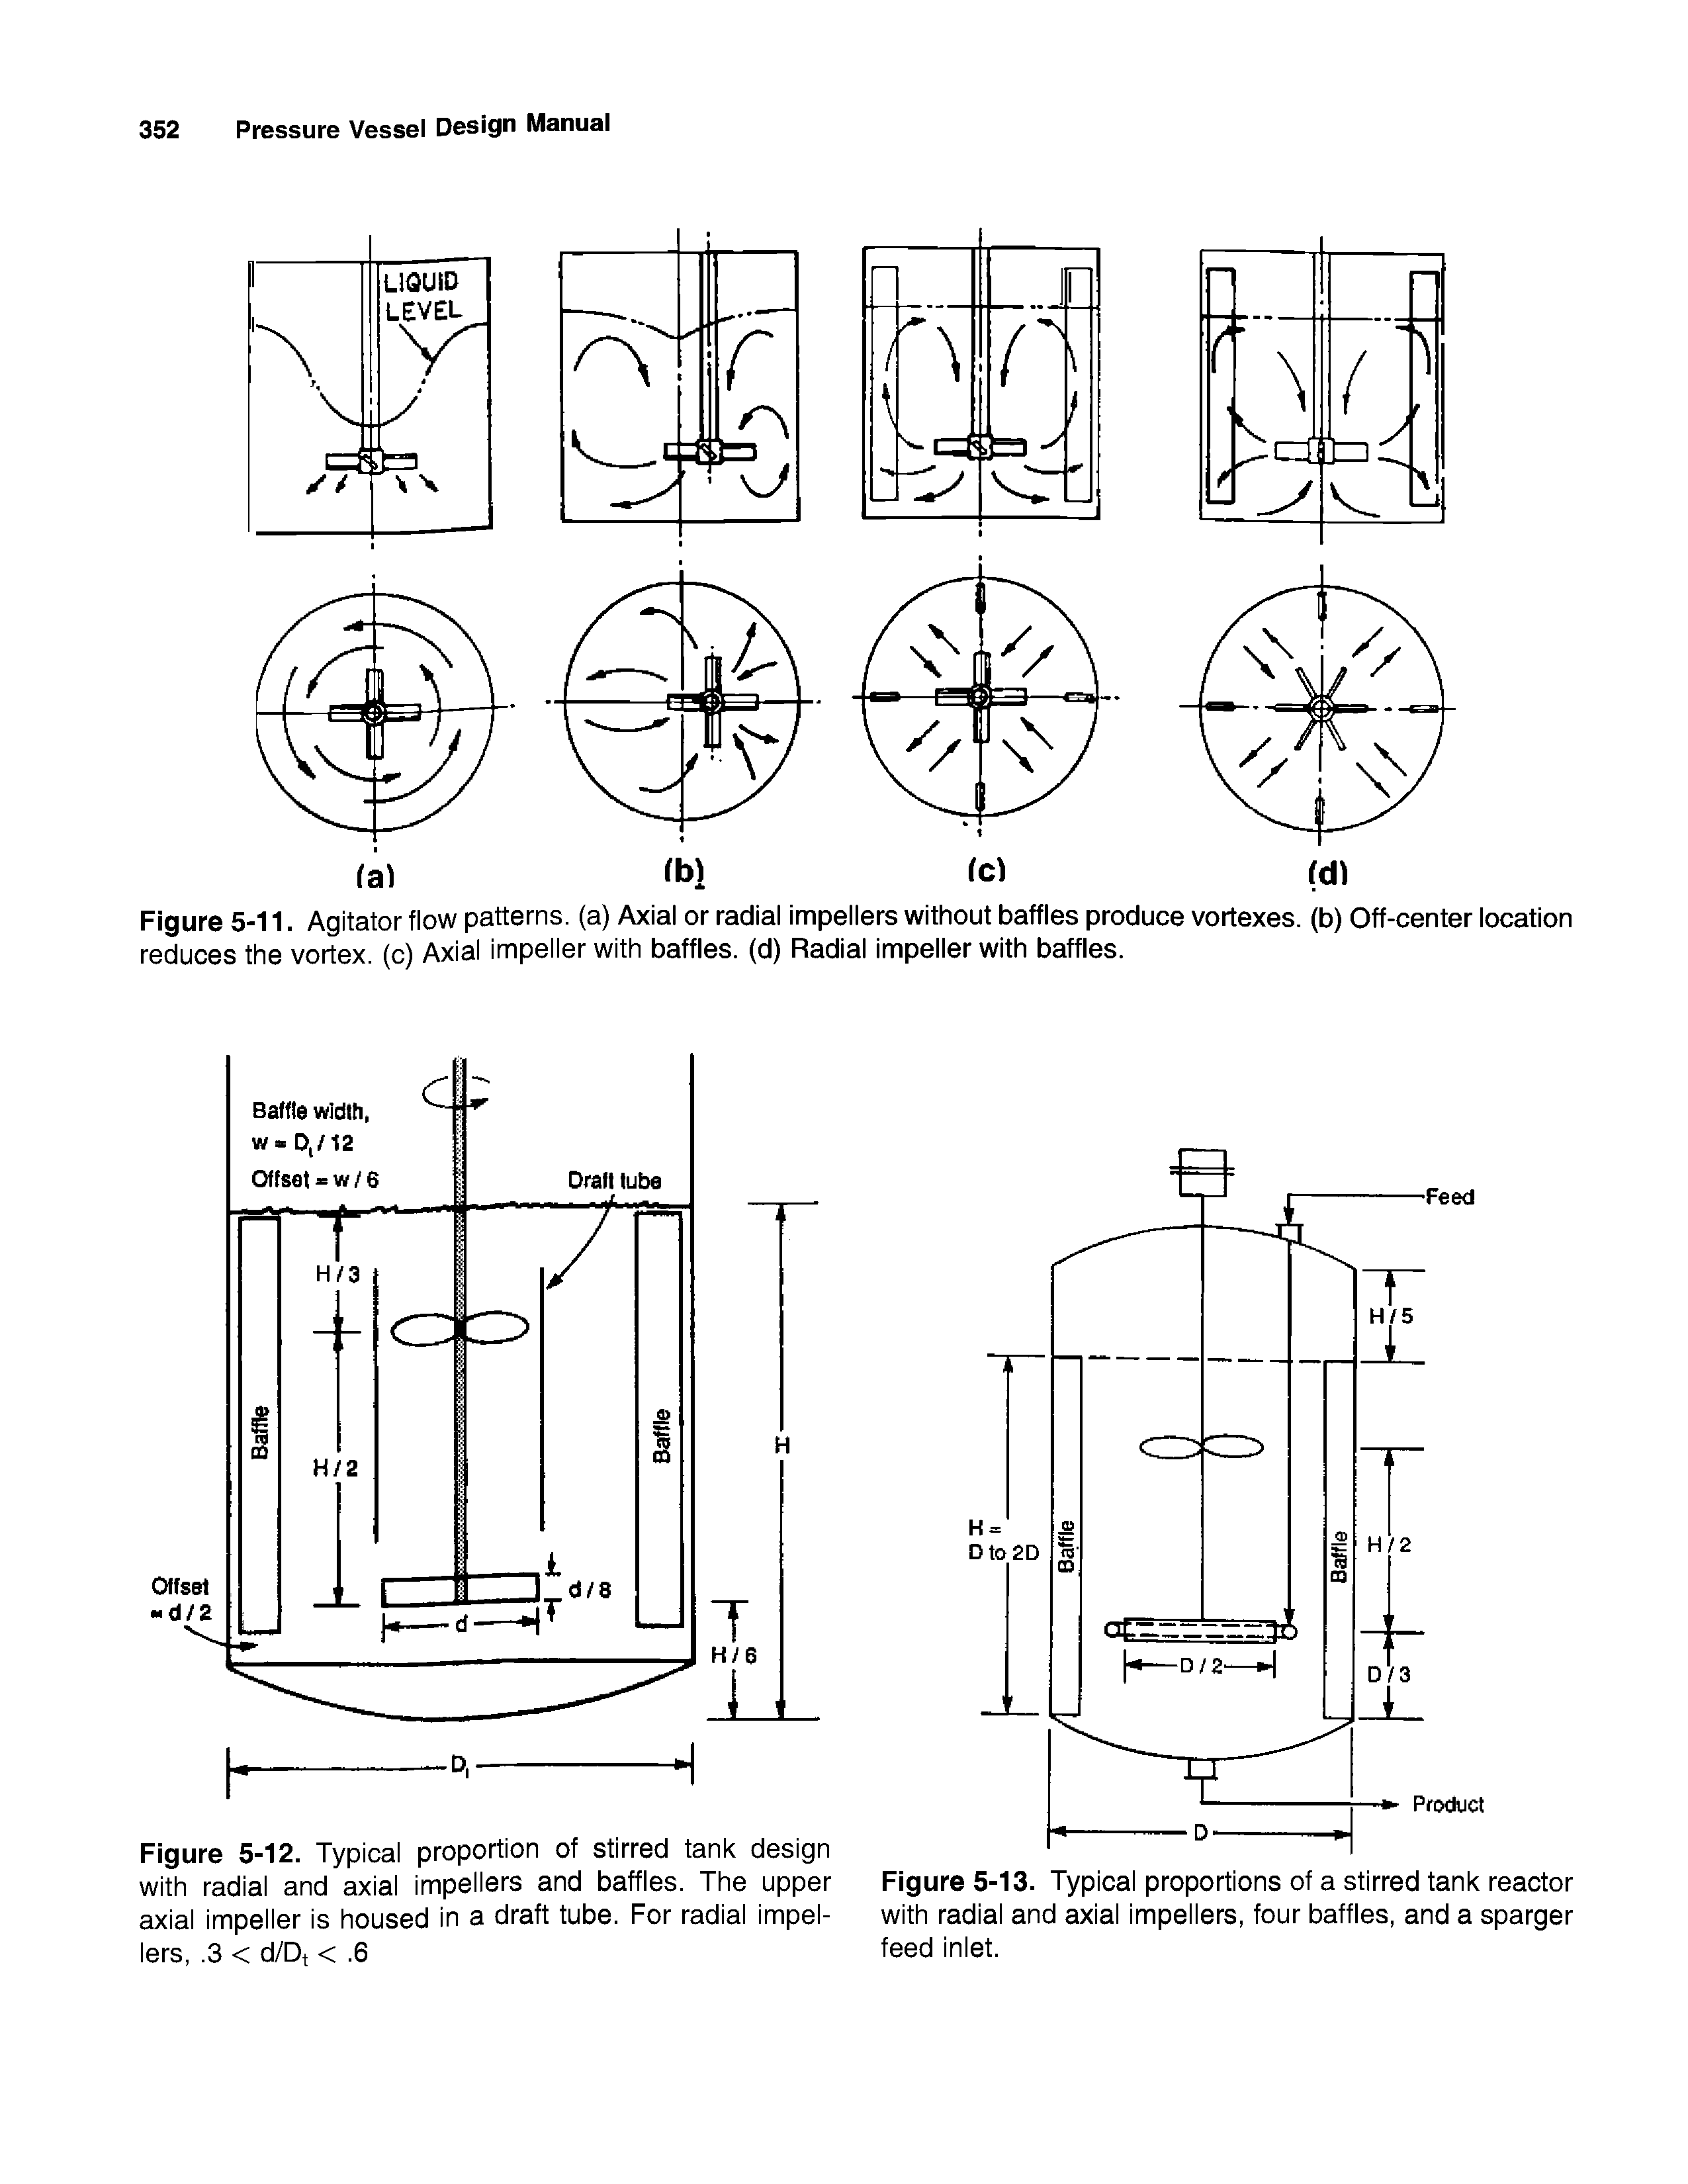 Figure 5-12. Typical proportion of stirred tank design with radial and axial impellers and baffles. The upper axial impeller is housed in a draft tube. For radial impellers,. 3 < d/Dt <. 6...